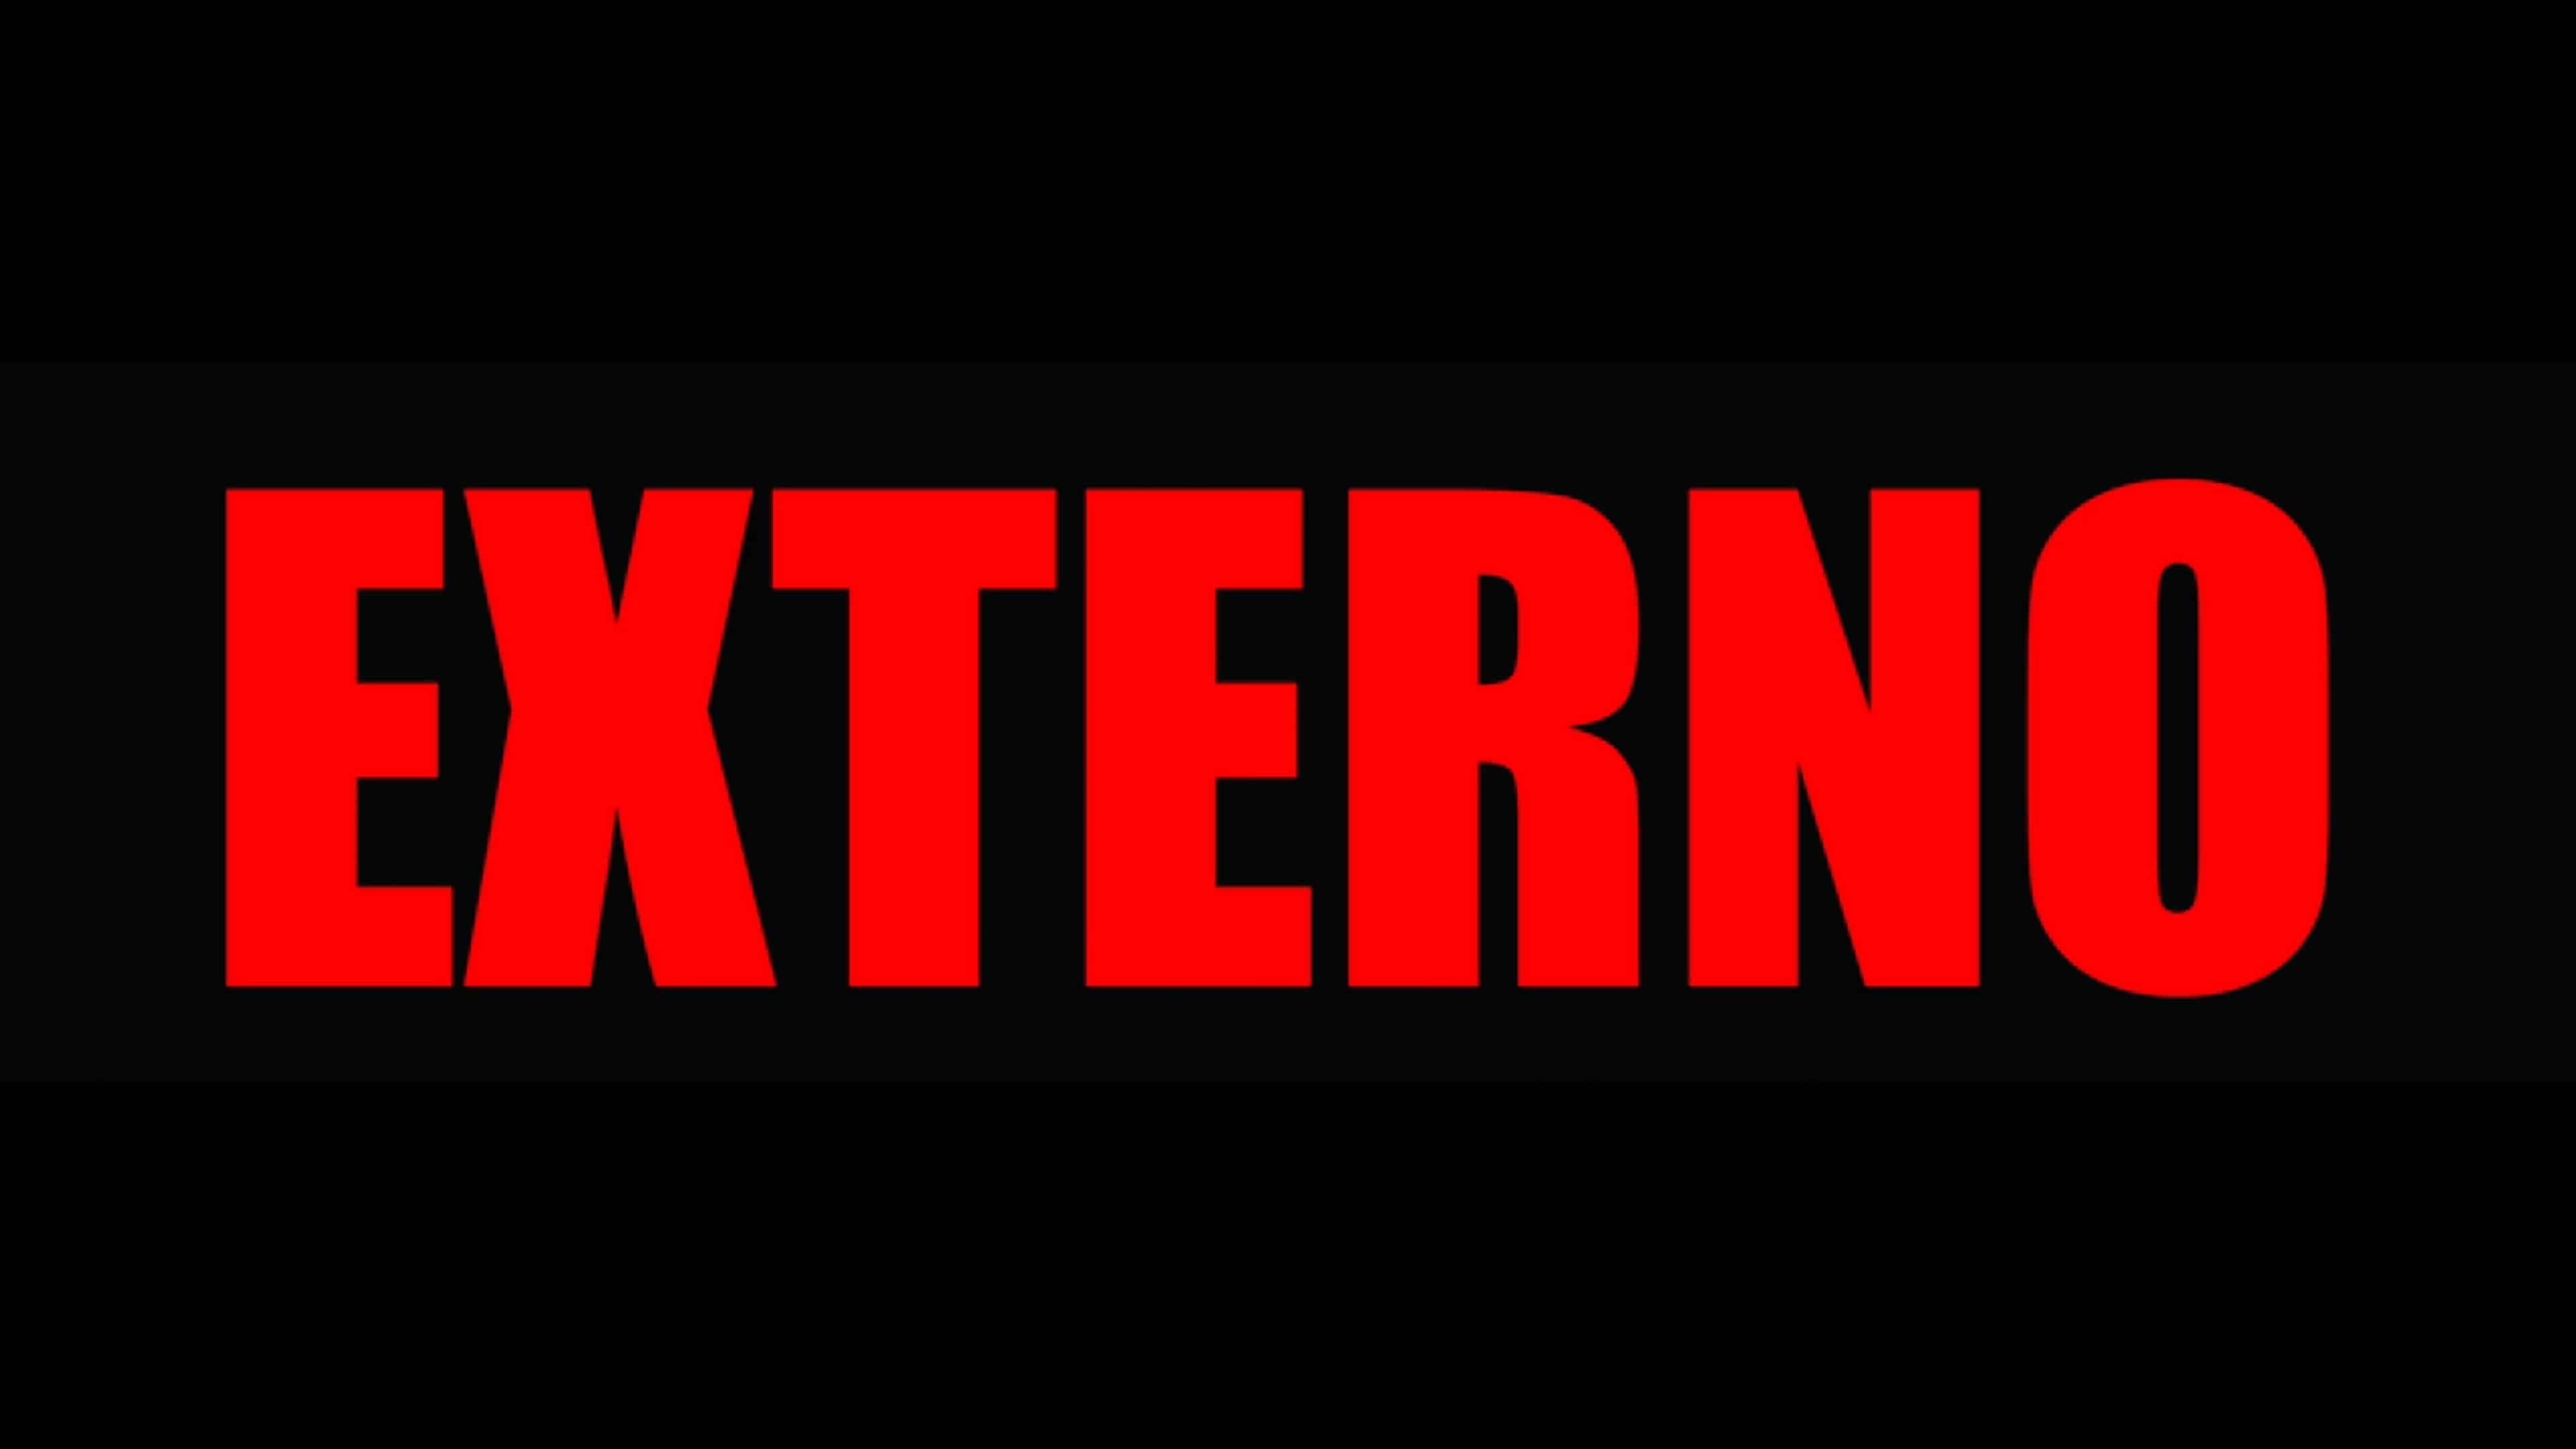 Externo (2021) – Review/Summary (with Spoilers)